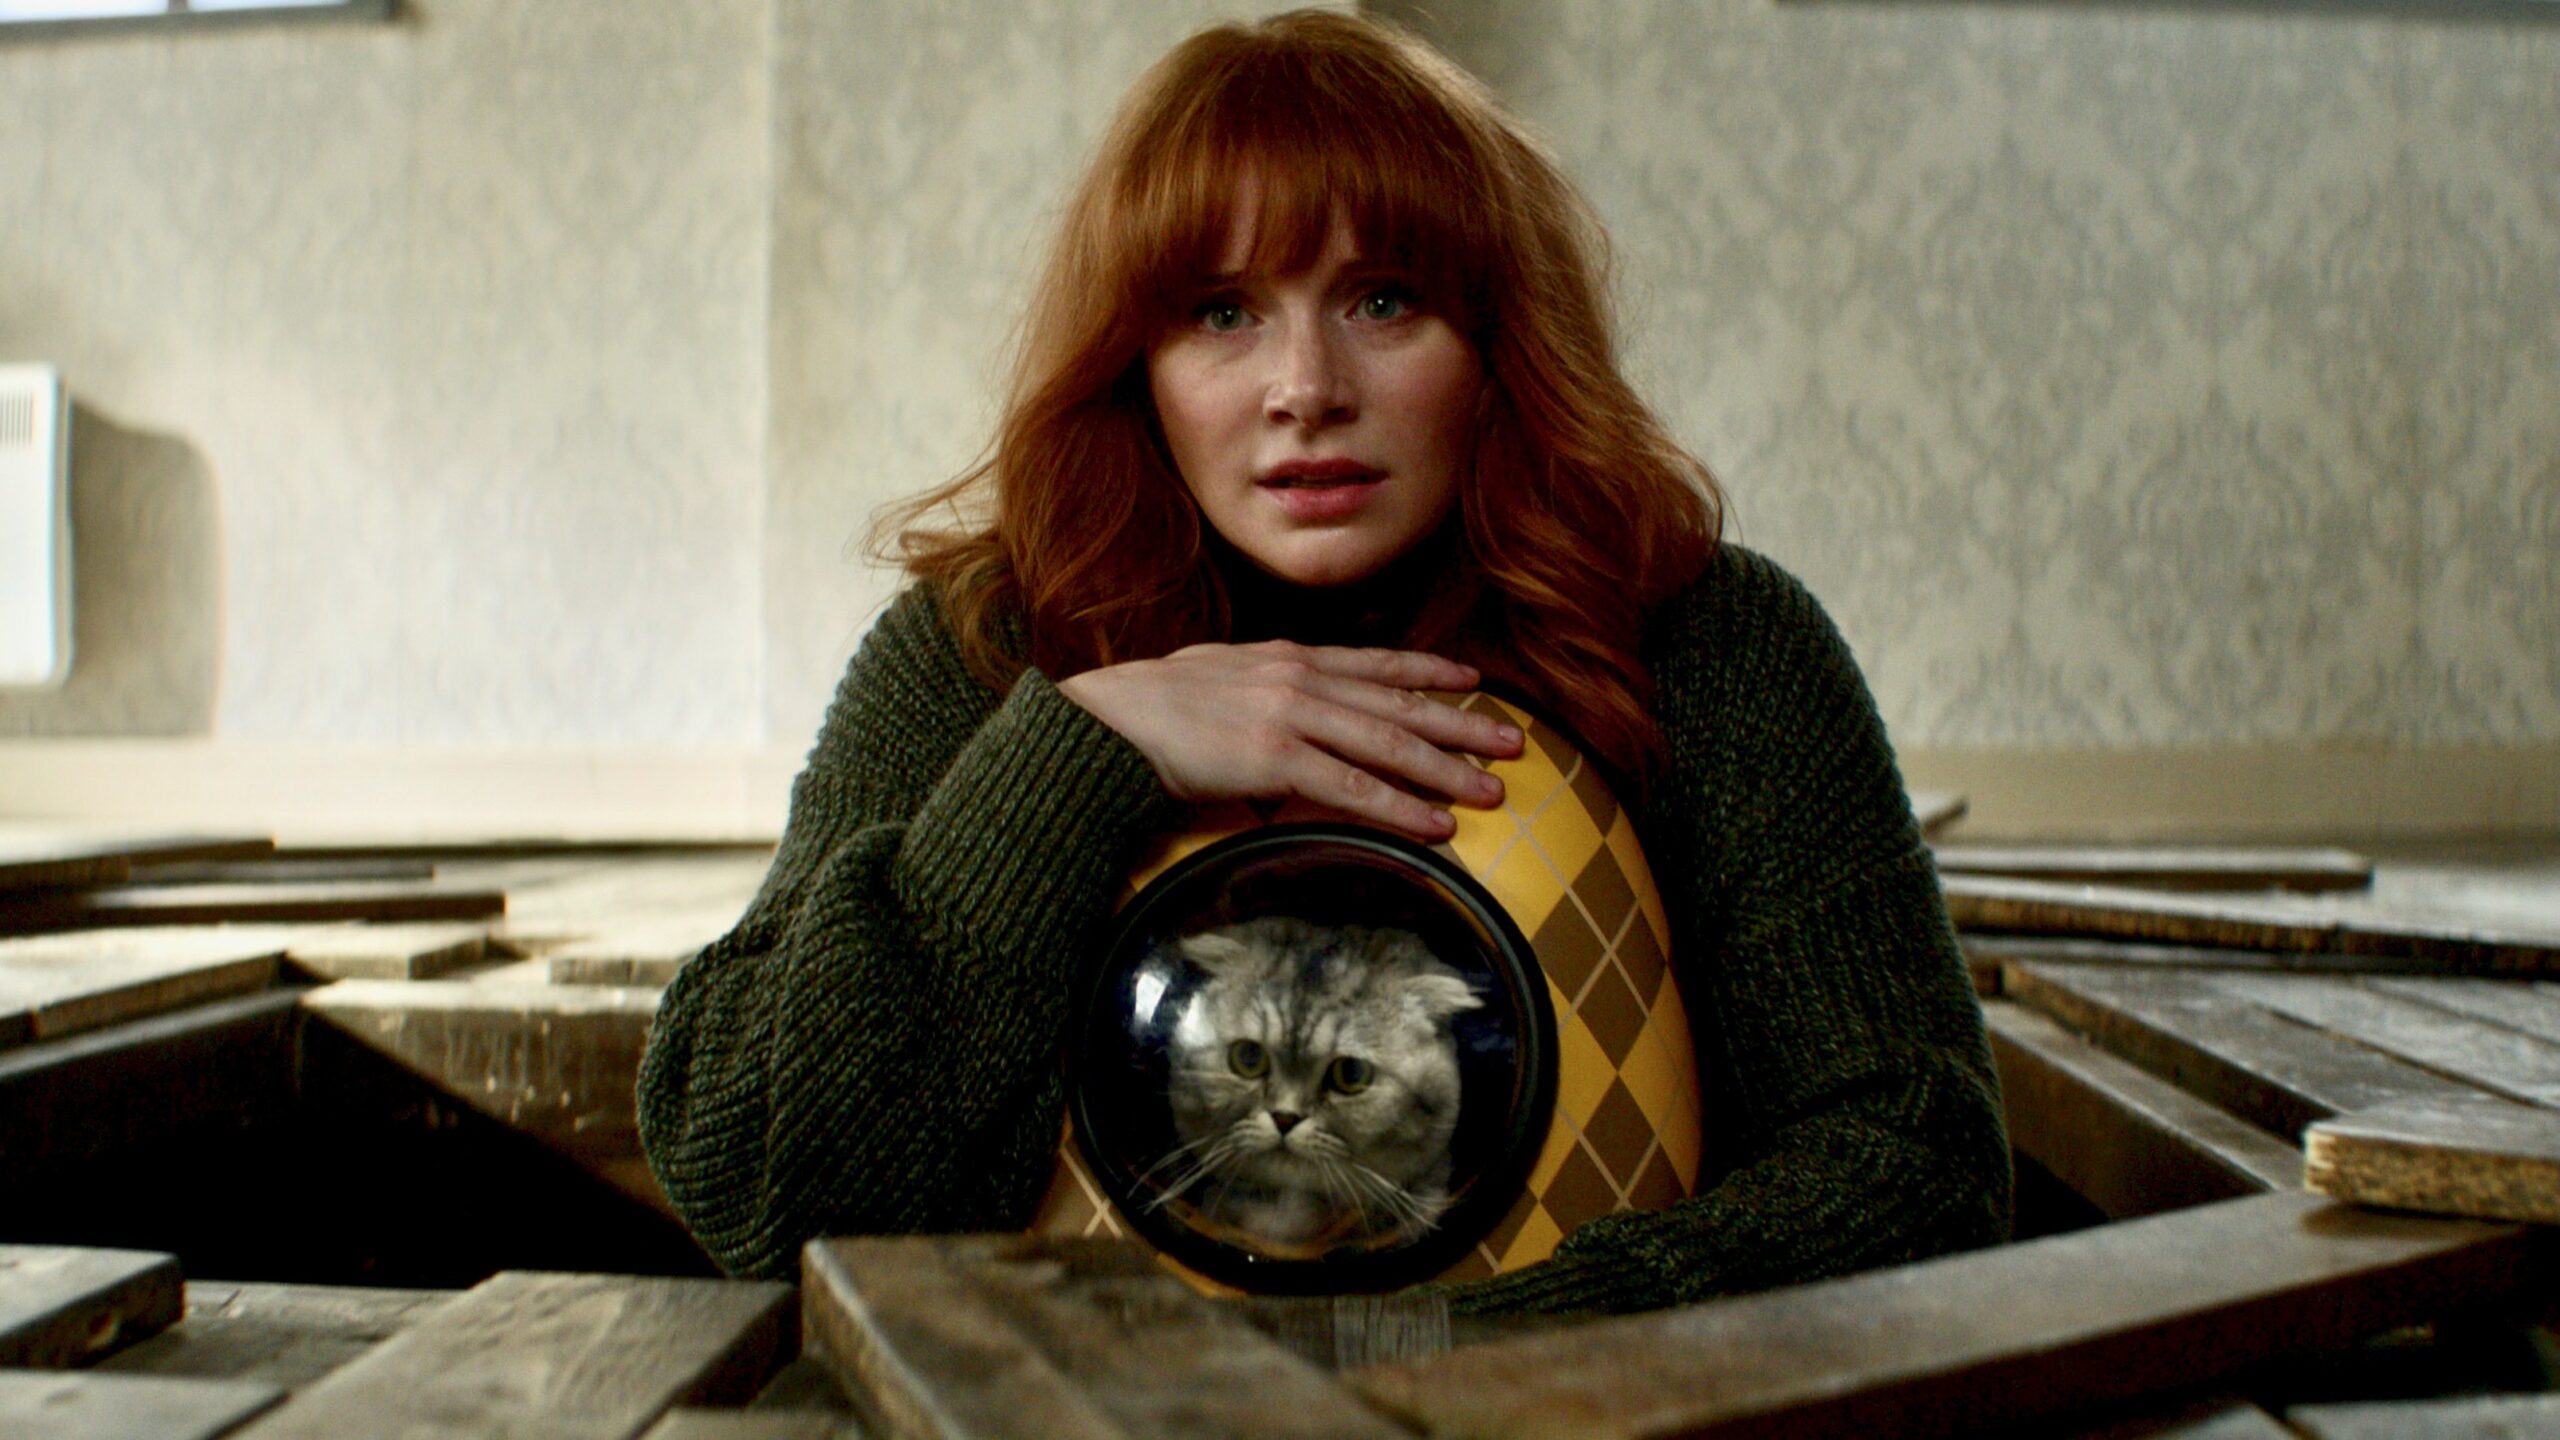 Bryce Dallas Howard with a cat in the movie Argylle